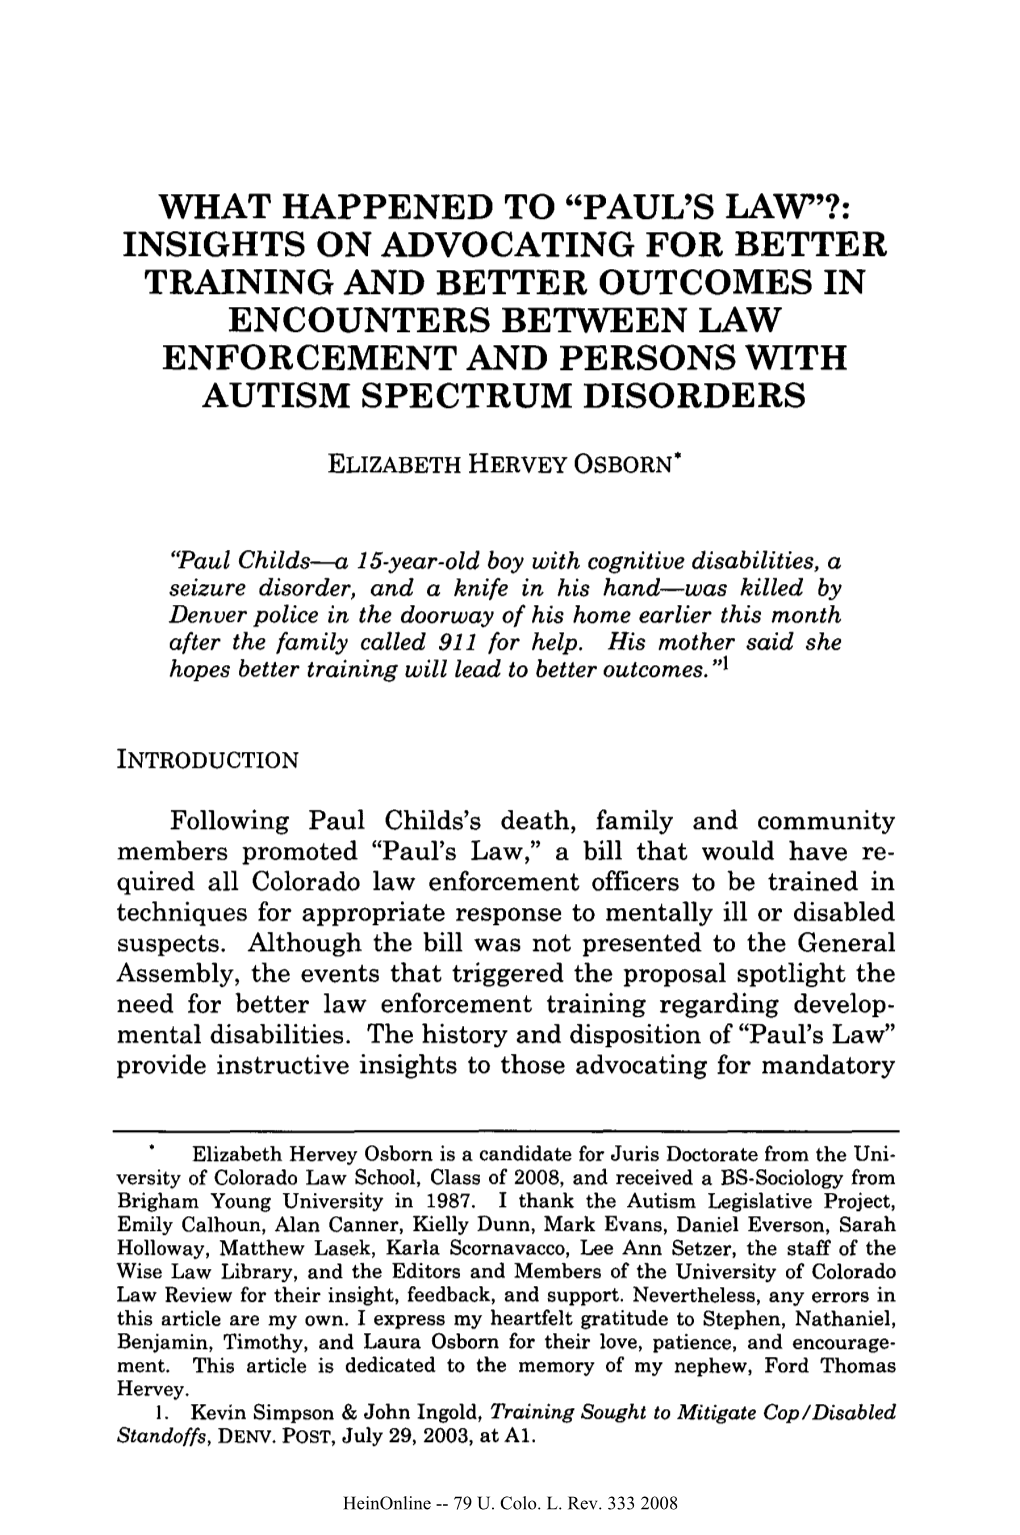 "Paul's Law"?: Insights on Advocating for Better Training and Better Outcomes in Encounters Between Law Enforcement and Persons with Autism Spectrum Disorders